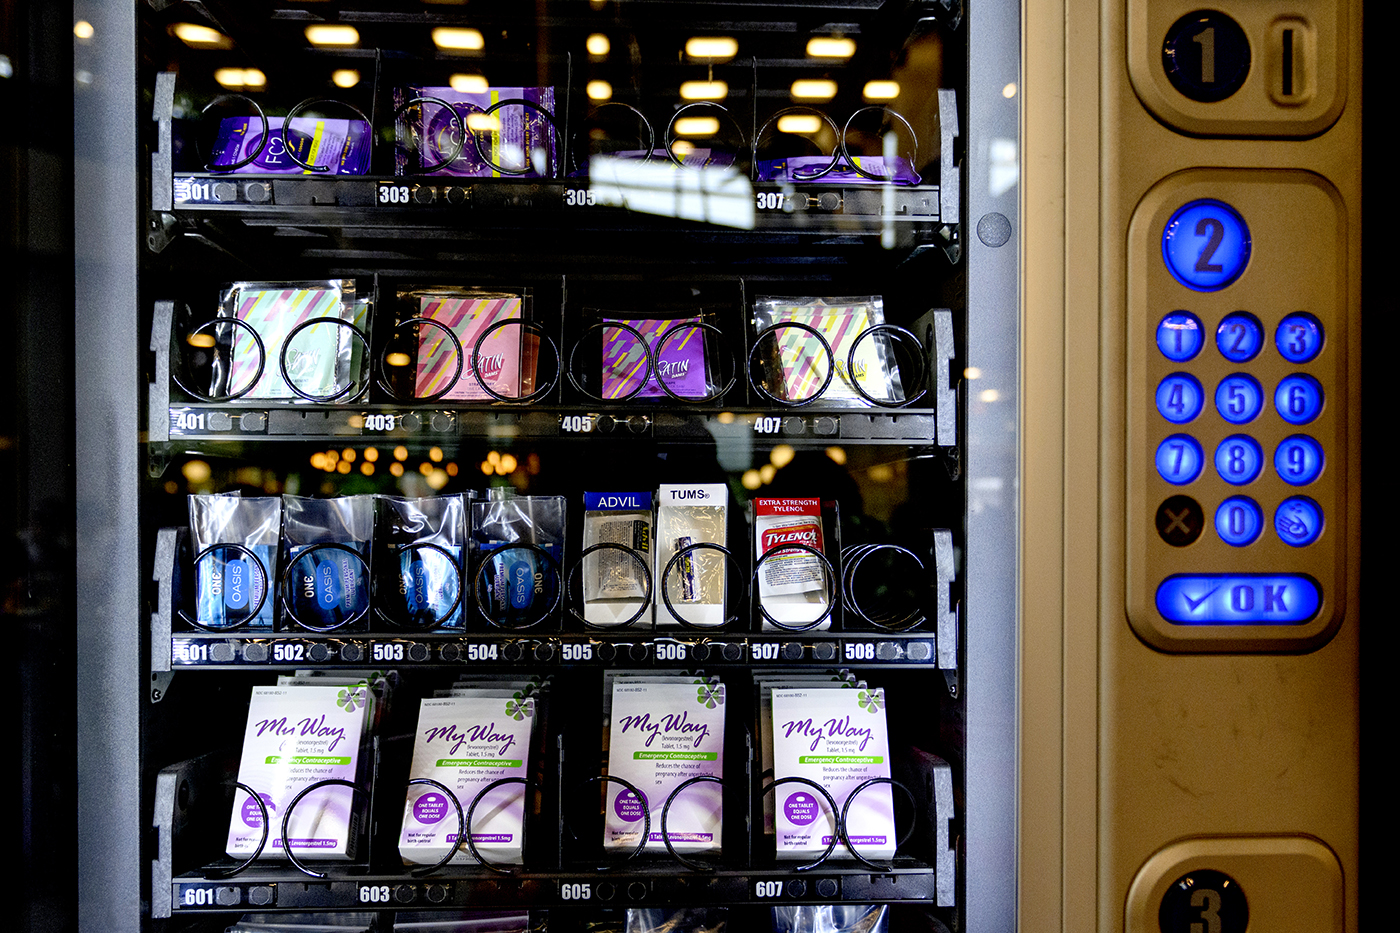 vending machine with wellness products inside